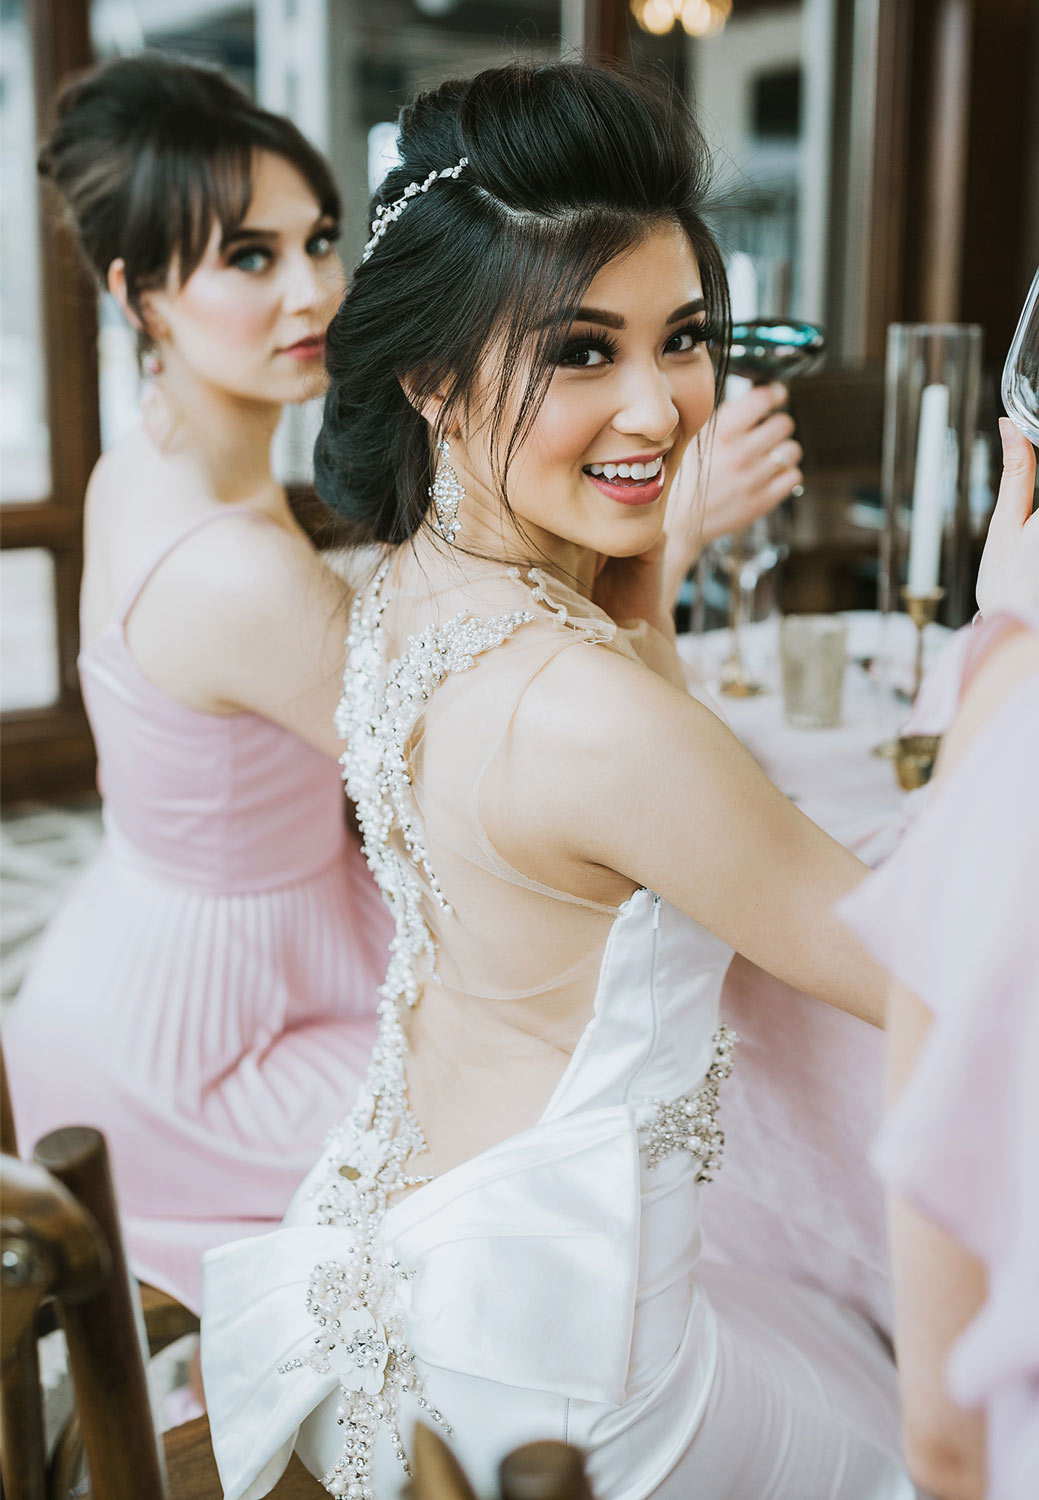 a bride looks over her shoulder at the camera while sitting at a table and raising a glass, a bridesmaid sits beside her slightly out of focus